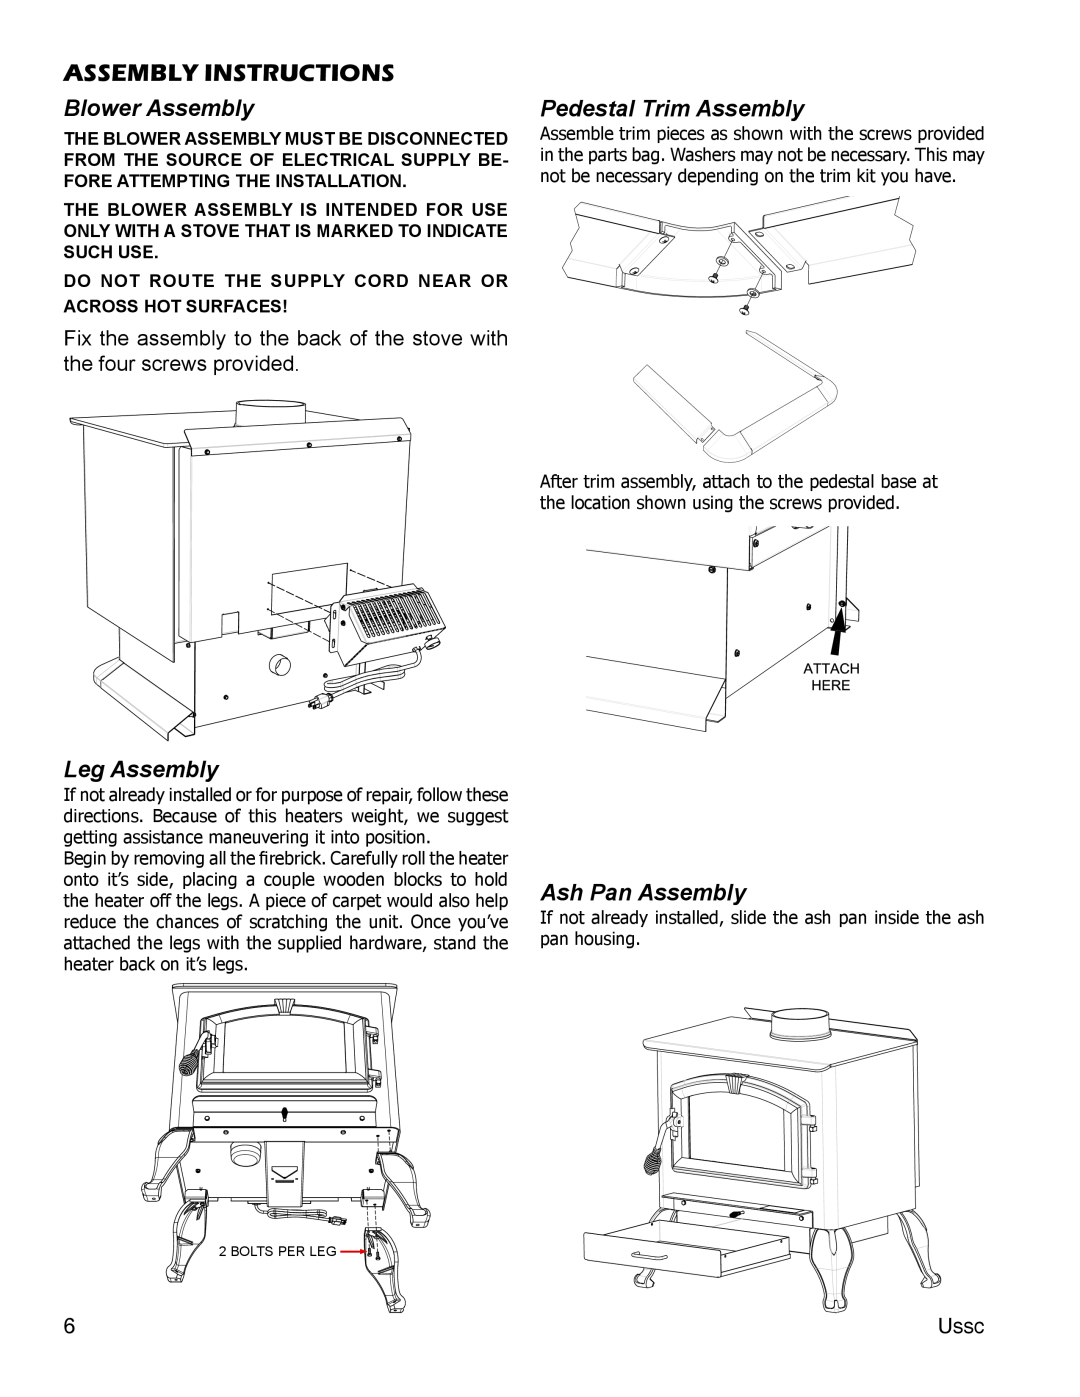 United States Stove 3000 (L) Assembly Instructions, Blower Assembly, Pedestal Trim Assembly, Leg Assembly 